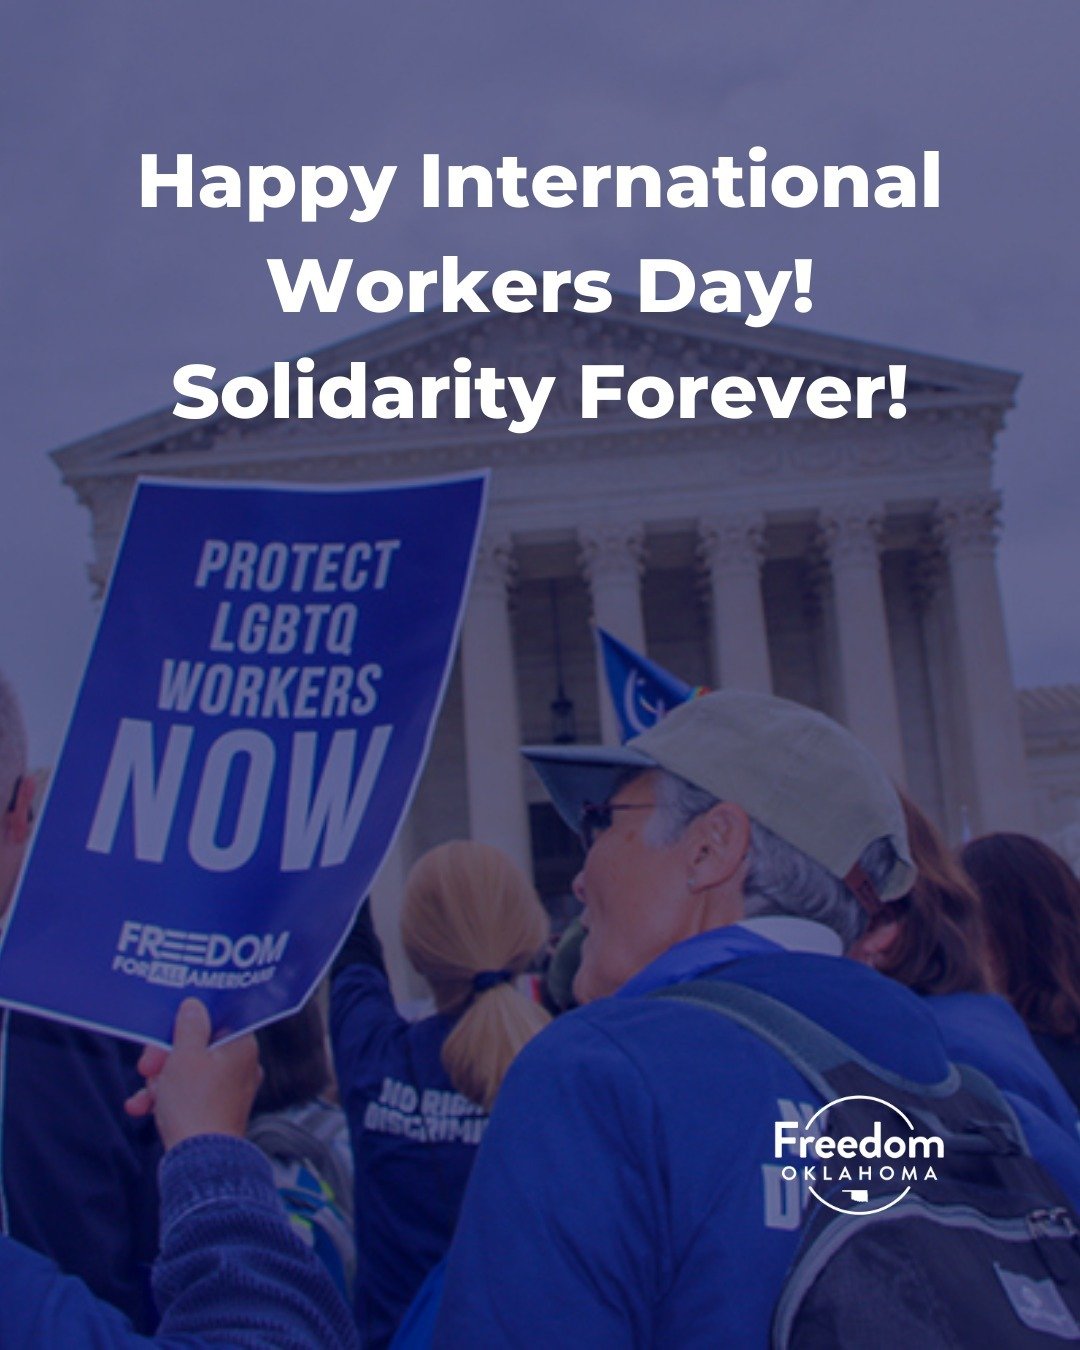 There is nothing commendable about work for work's sake. Workers rights, economic justice, and workplace equity have always been central to 2SLGBTQ+ liberation. To all of the workers and working class this May Day, solidarity forever! 

ID: photo of 